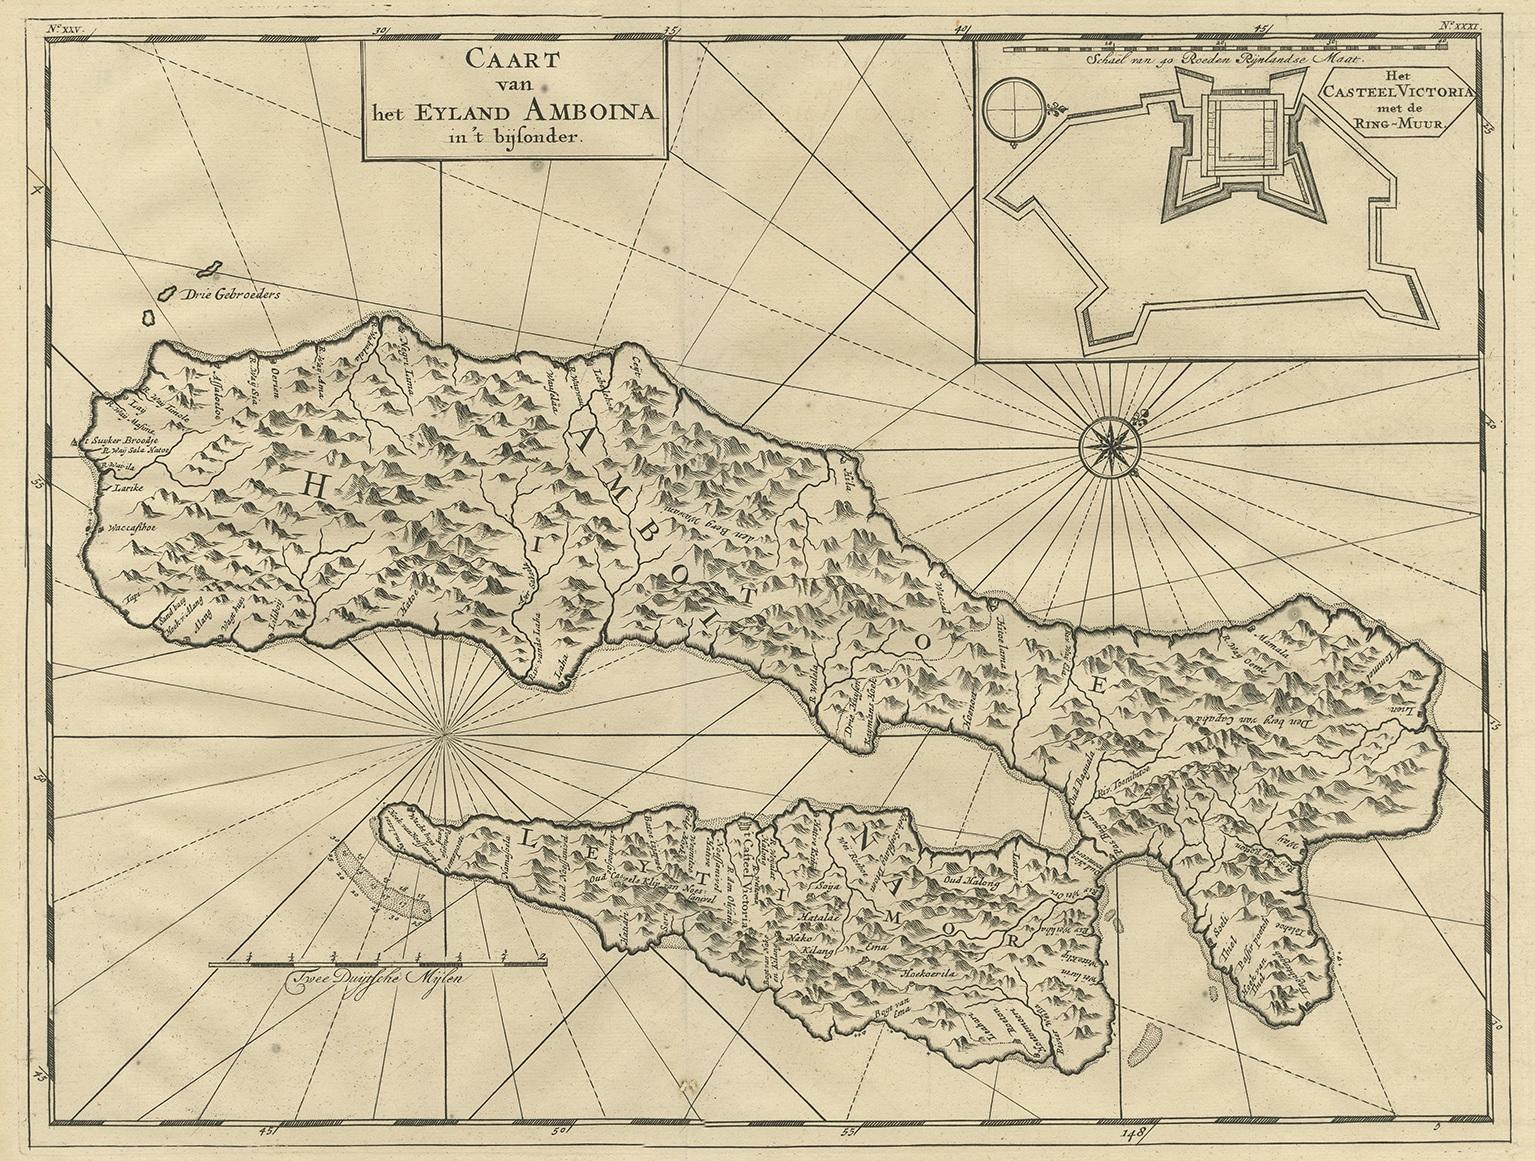 Antique map titled 'Caart van het Eyland Amboina in 't bijsonder'. Map of the Islands Ambon and Timor, one of the Moluccan Islands, Indonesia, with an inset of castle Victoria with the ring wall. This print originates from 'Oud en Nieuw Oost-Indiën'